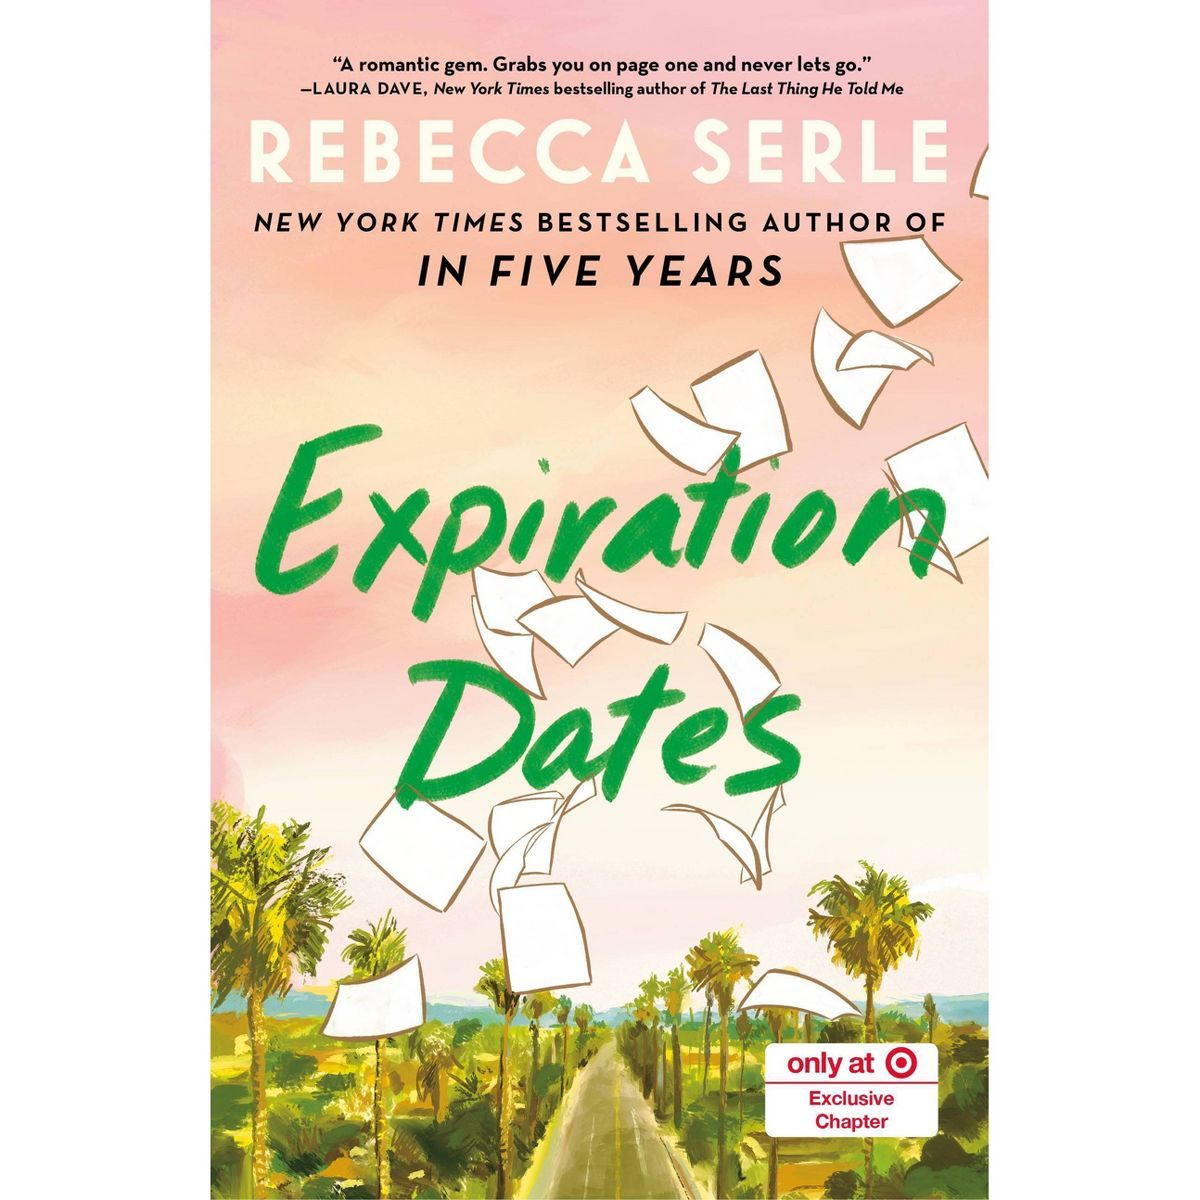 Expiration Dates - Exclusive Edition - by Rebecca Serle (Hardcover) | Target